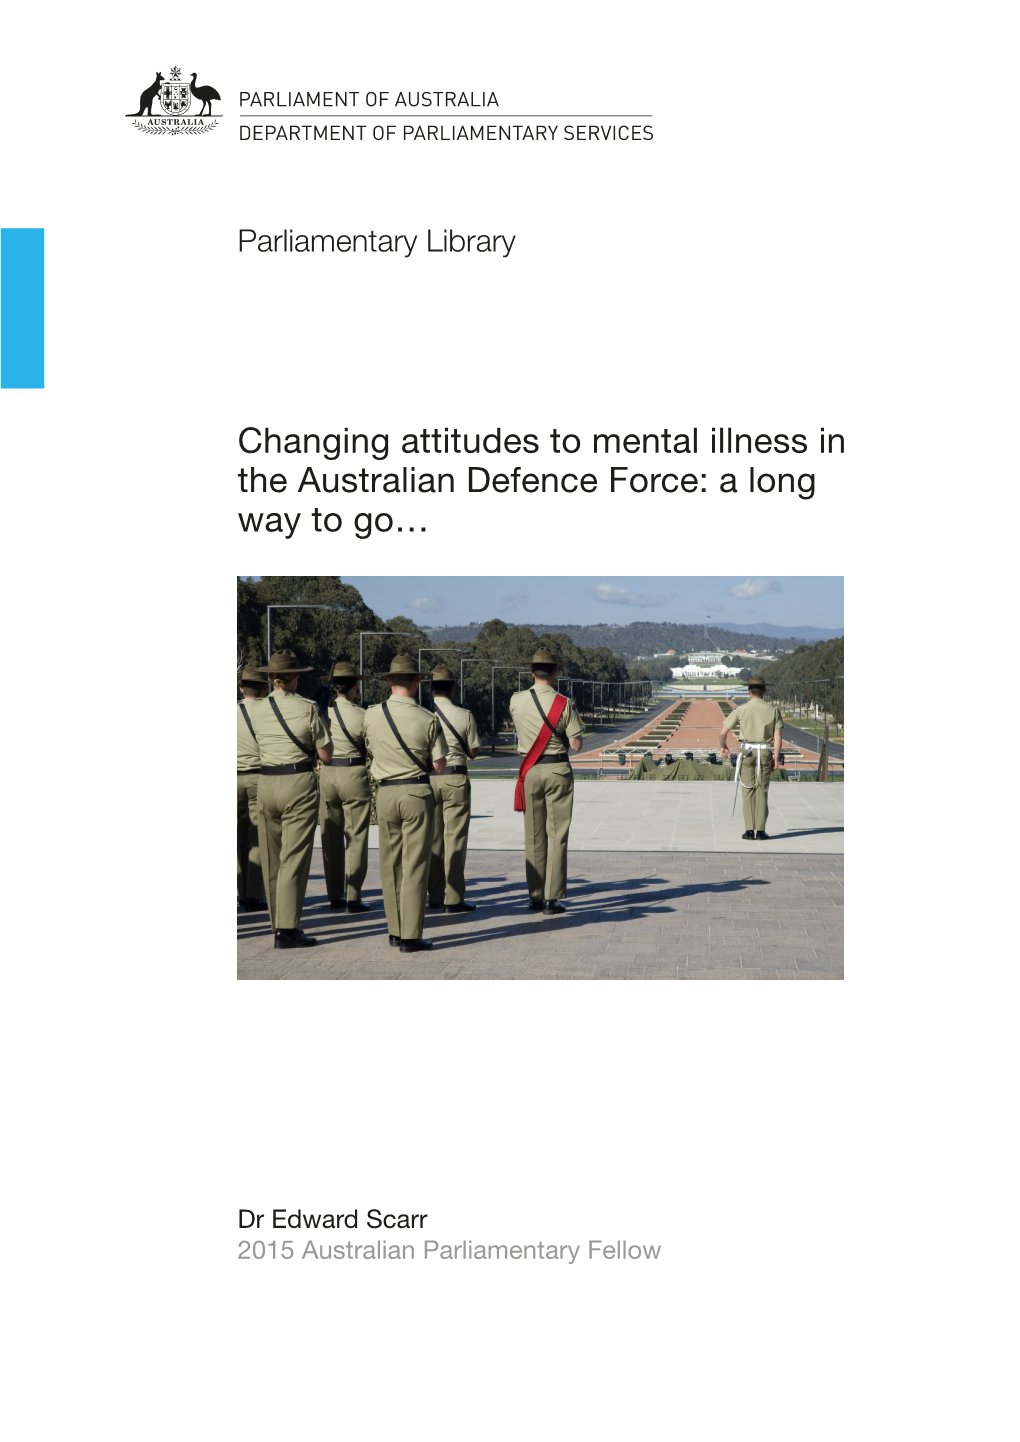 Changing Attitudes to Mental Illness in the Australian Defence Force: a Long Way to Go…